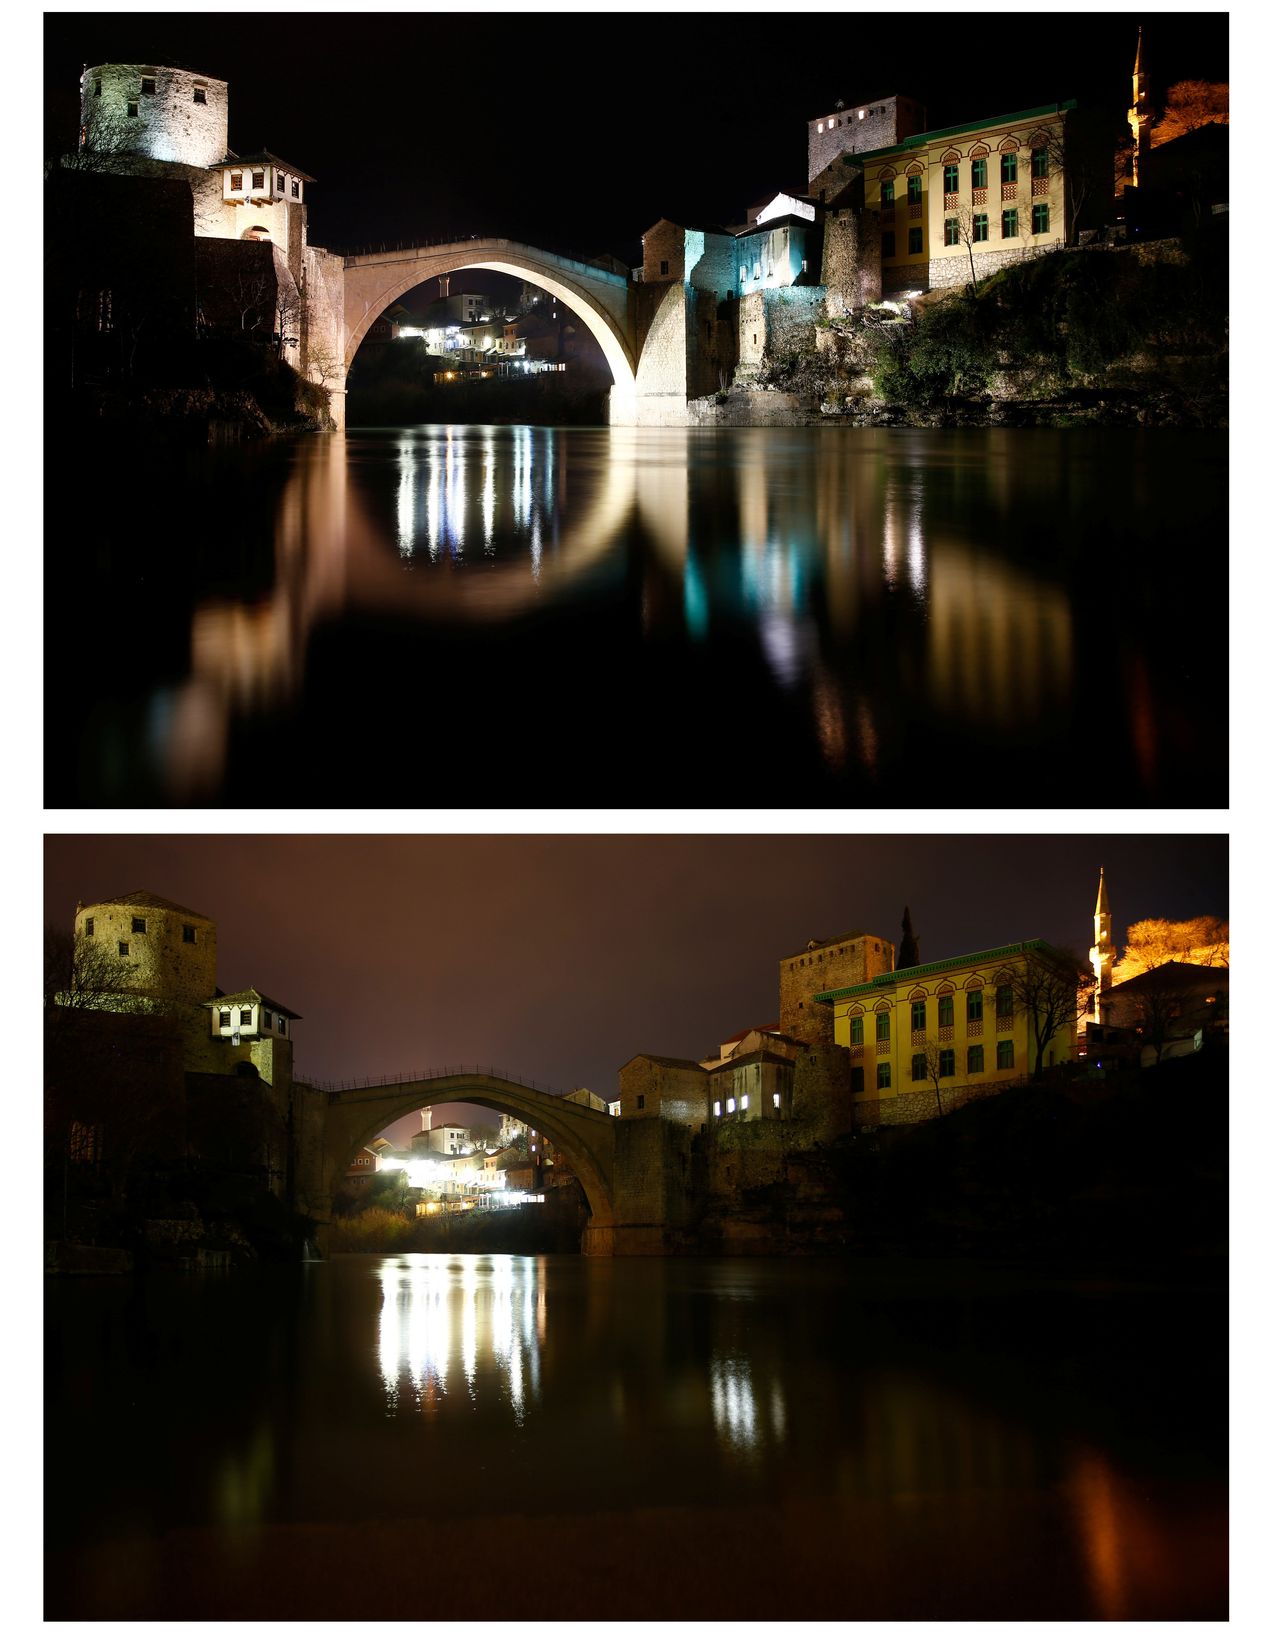 The Old Bridge in Mostar, Bosnia and Herzegovina, before (top) and during (bottom) Earth Hour.